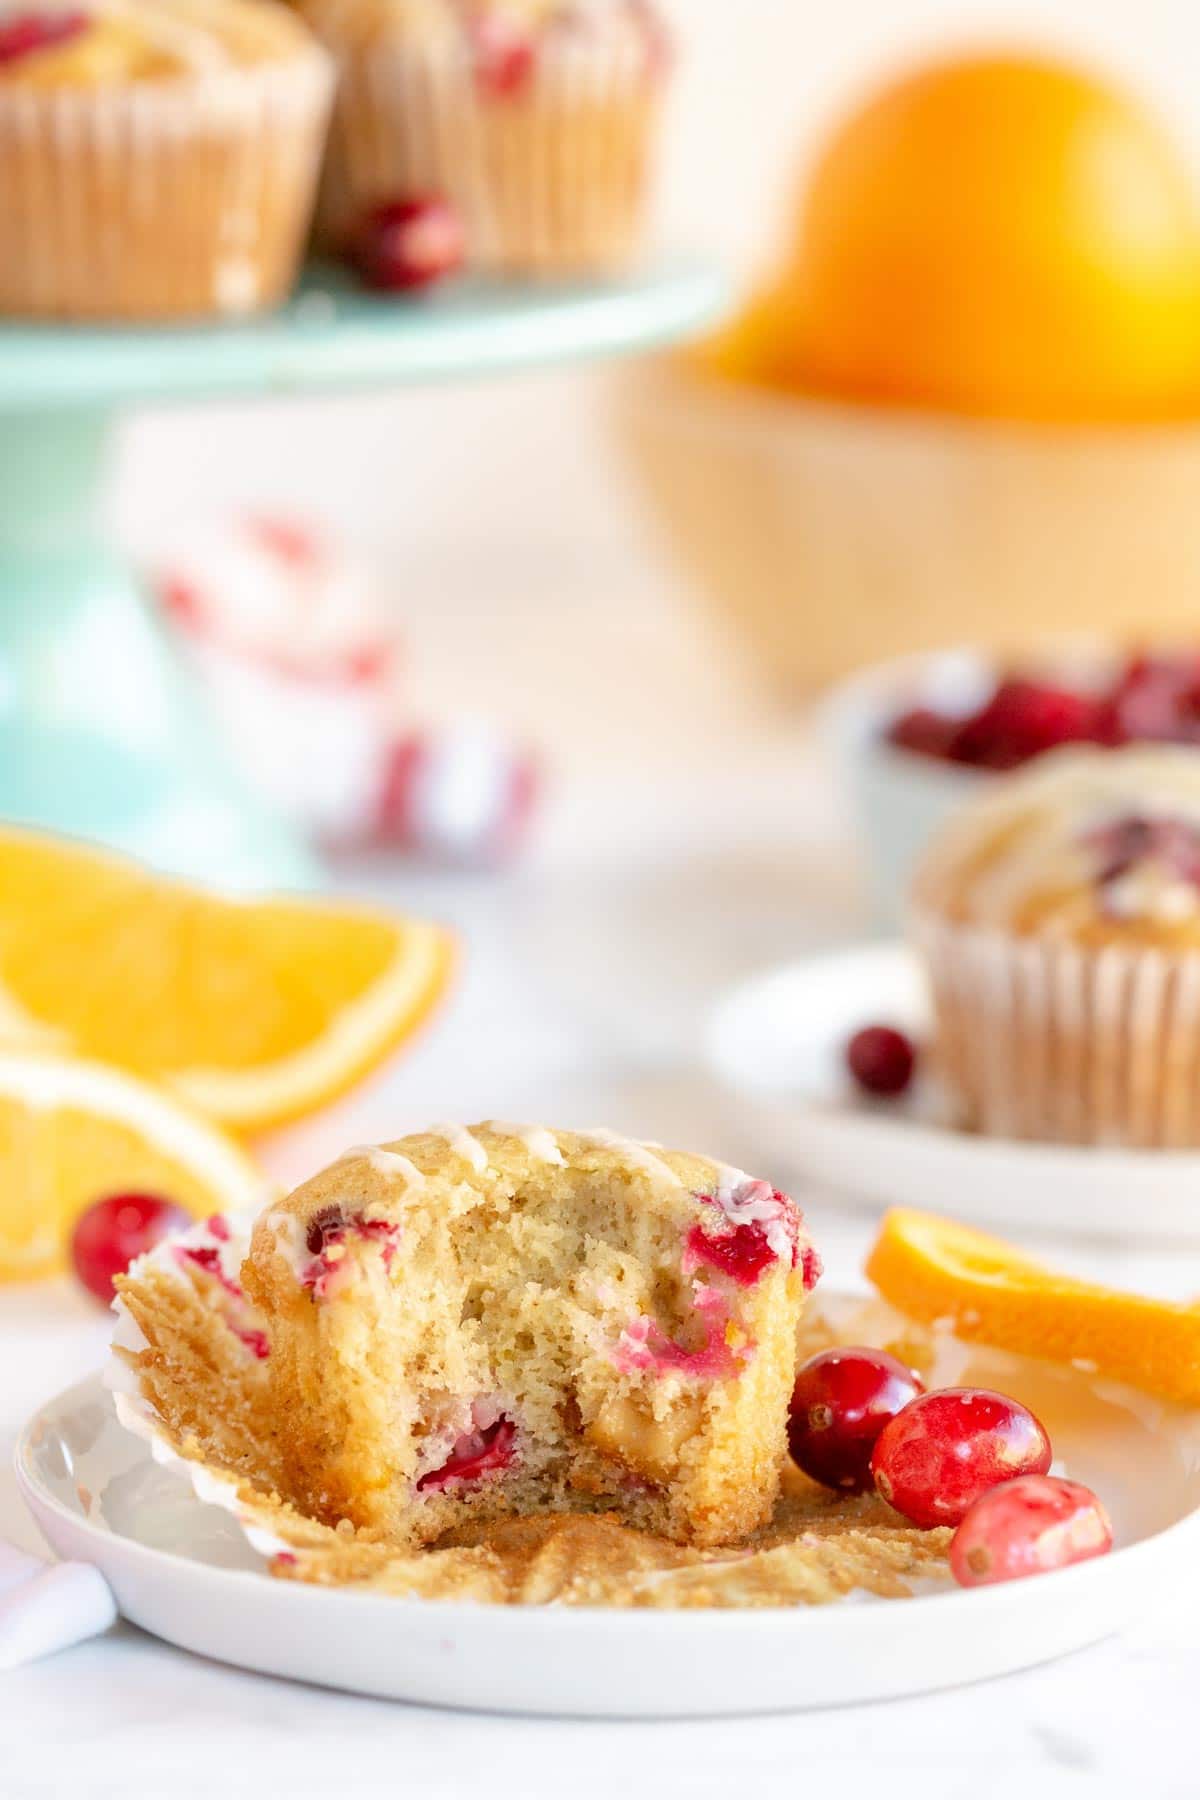 Cranberry orange muffin on a white plate with a bite out of it